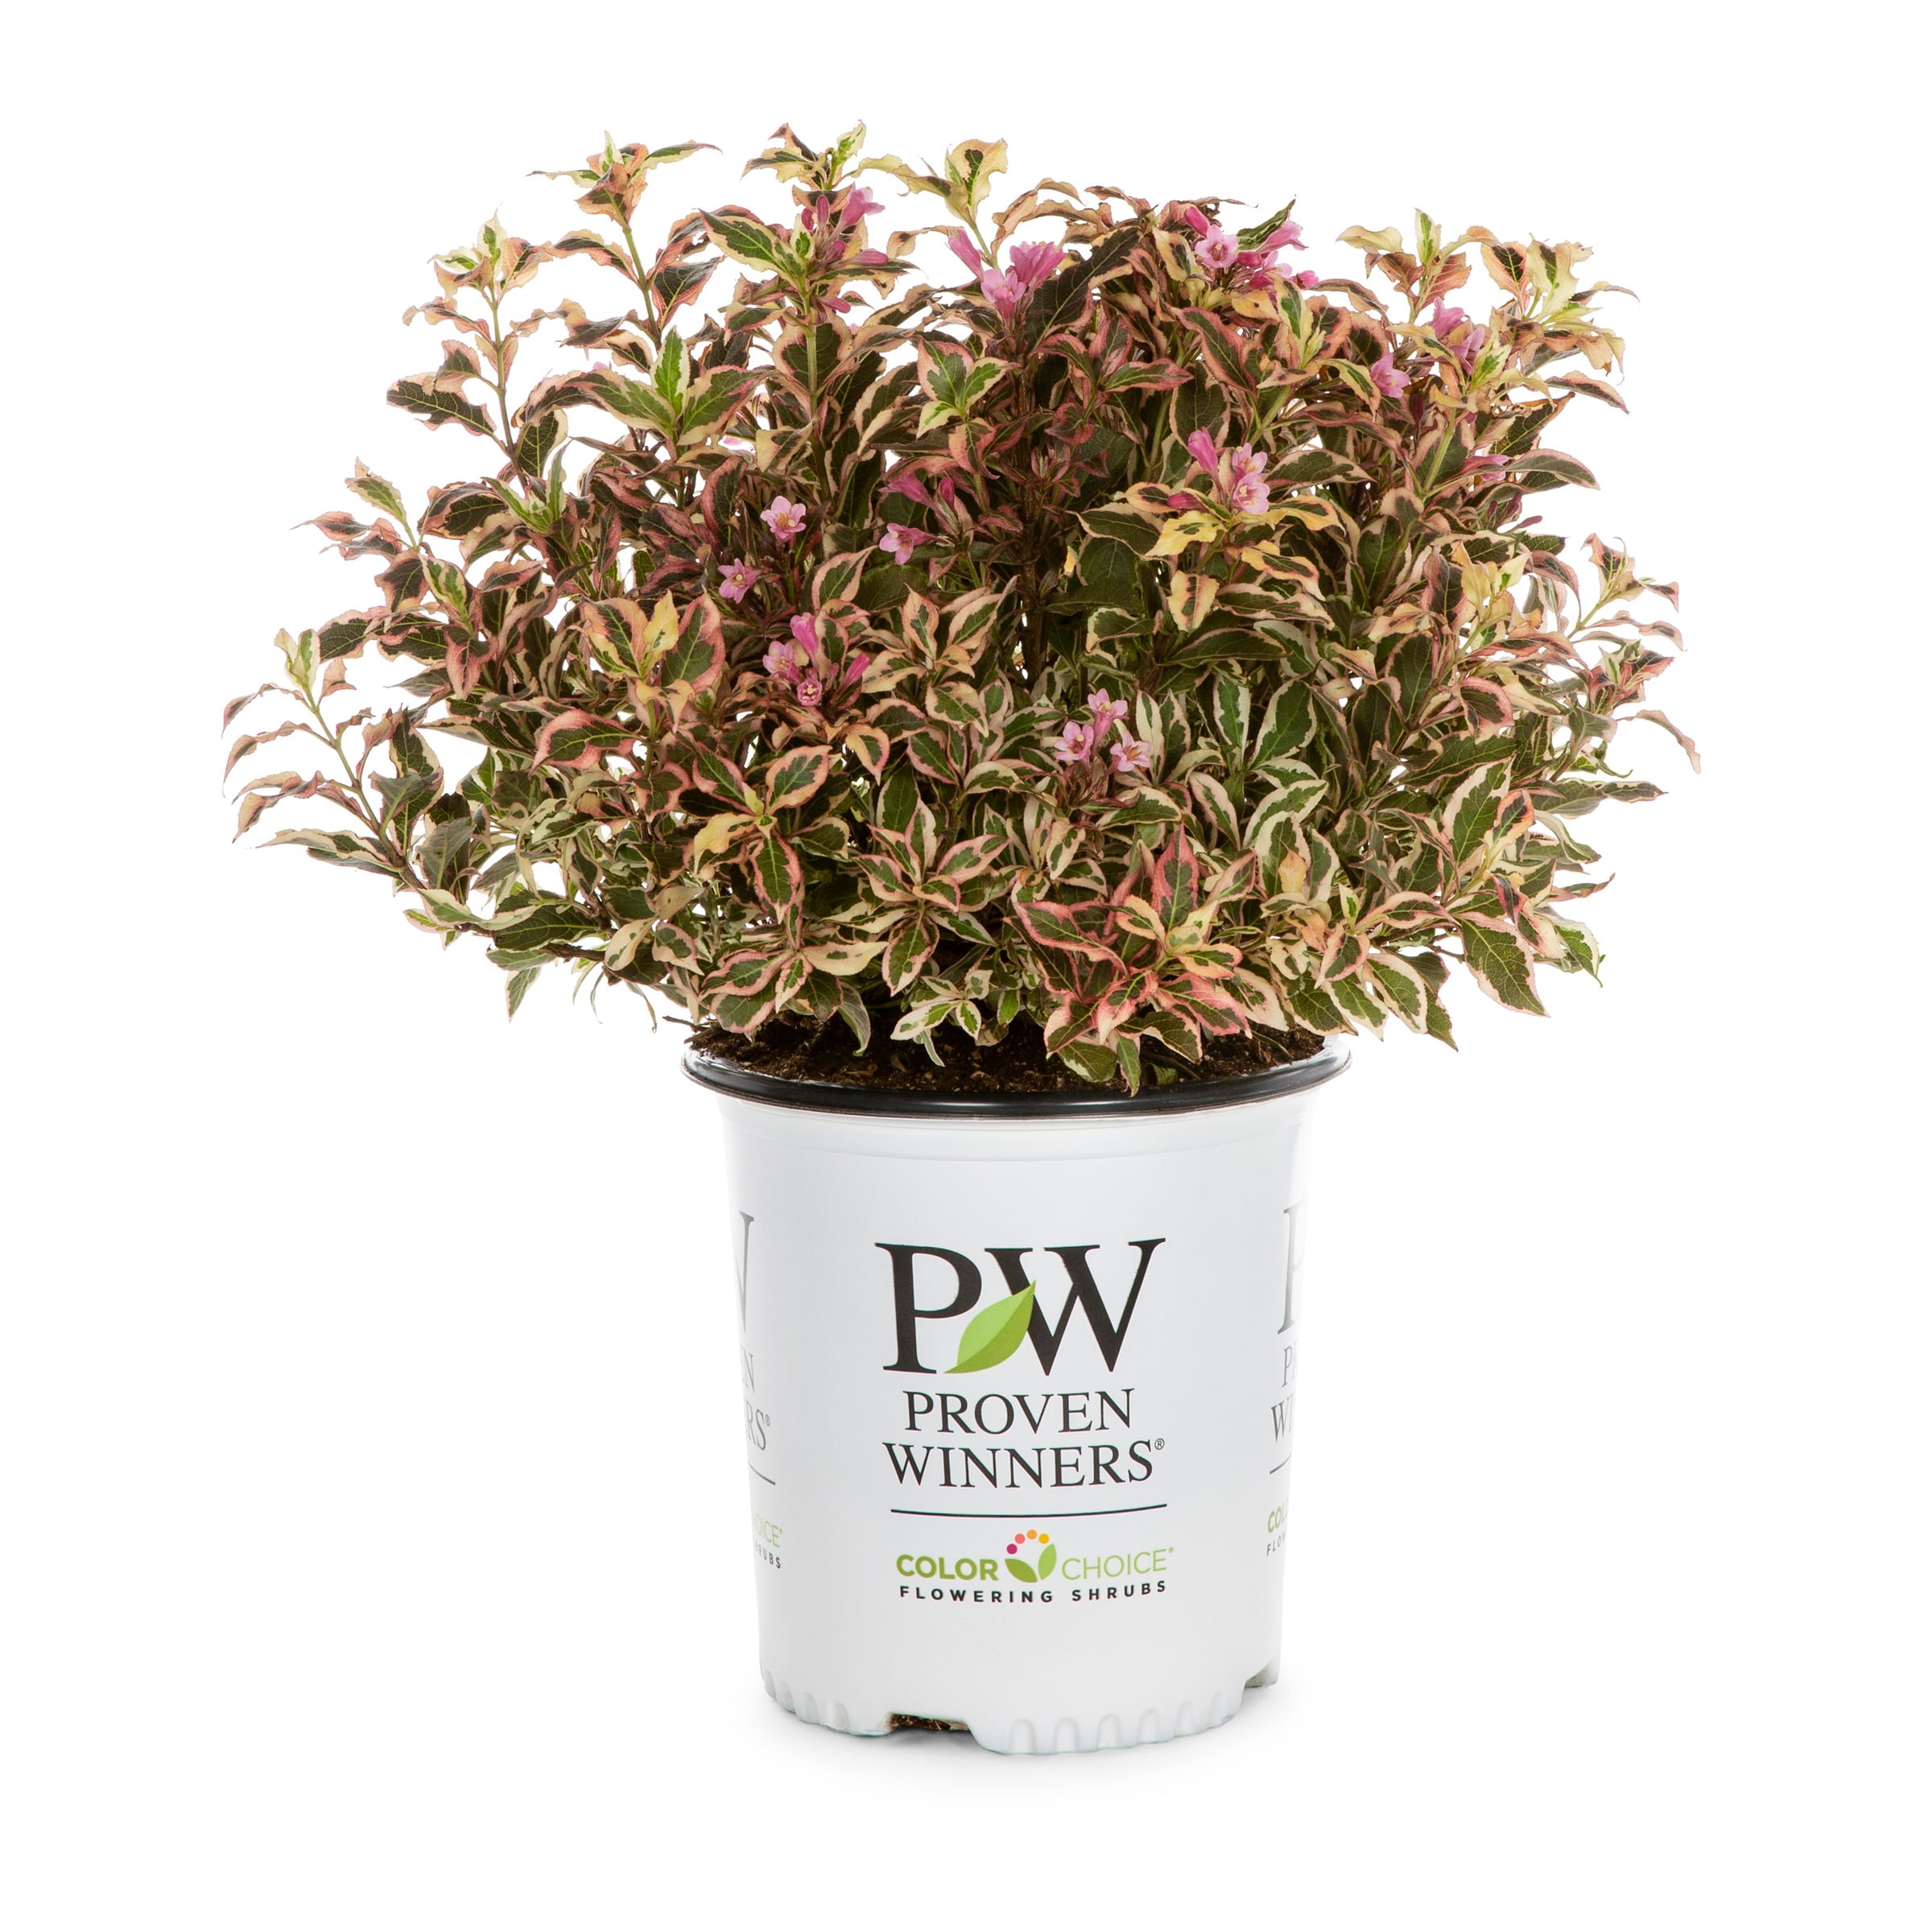 Proven Winners Feature Shrubs at